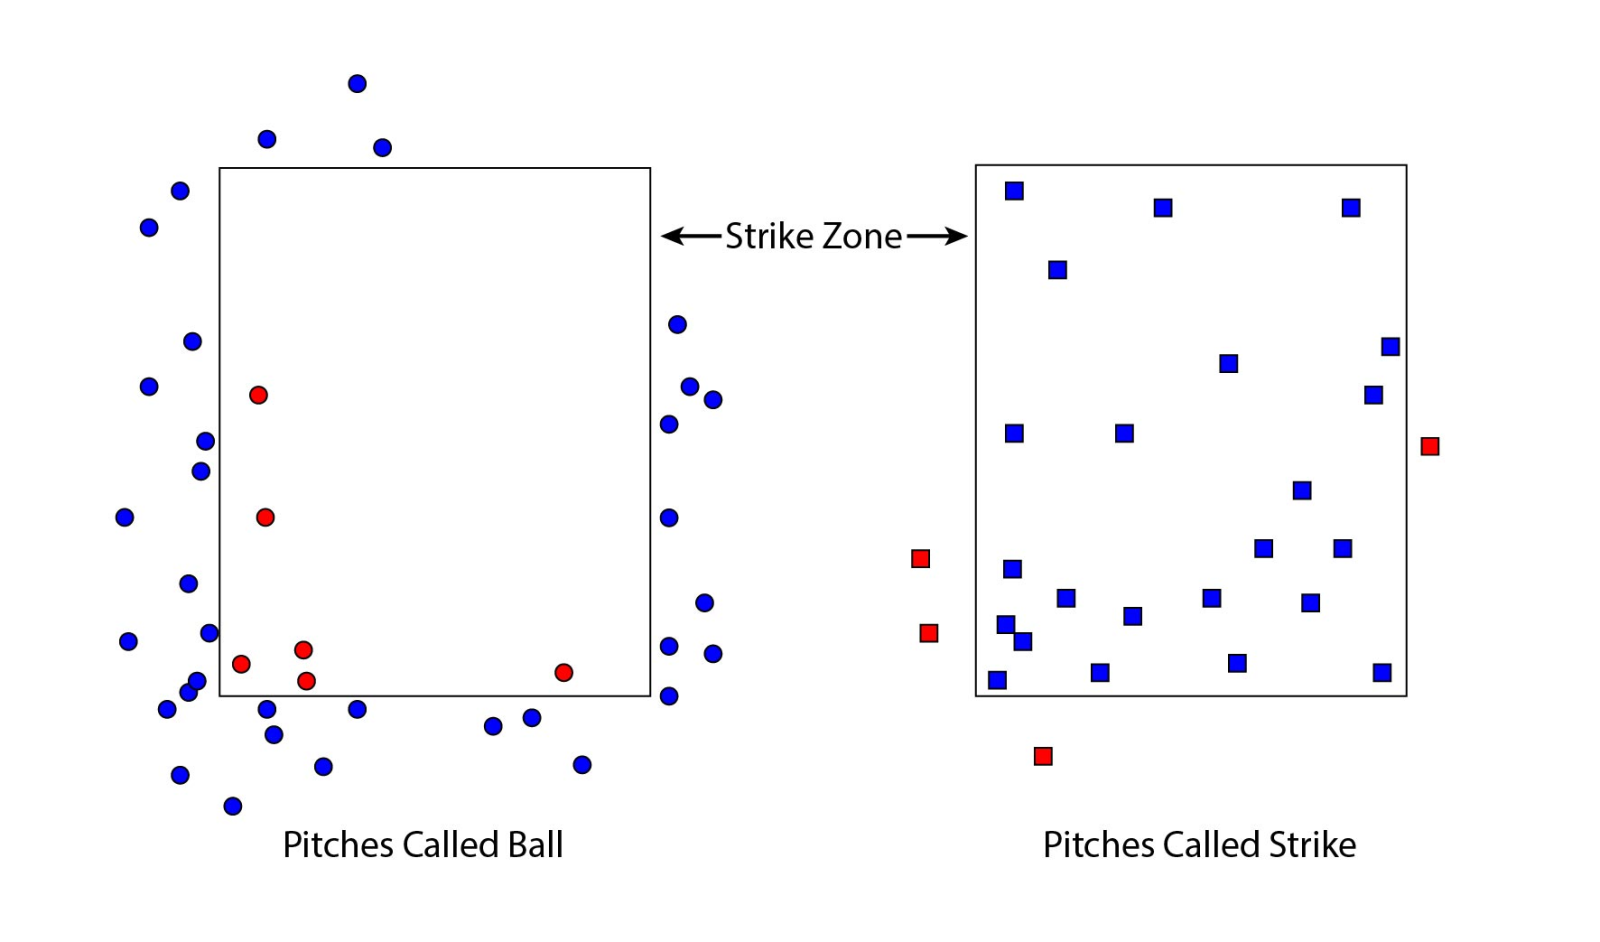 Pitches Called